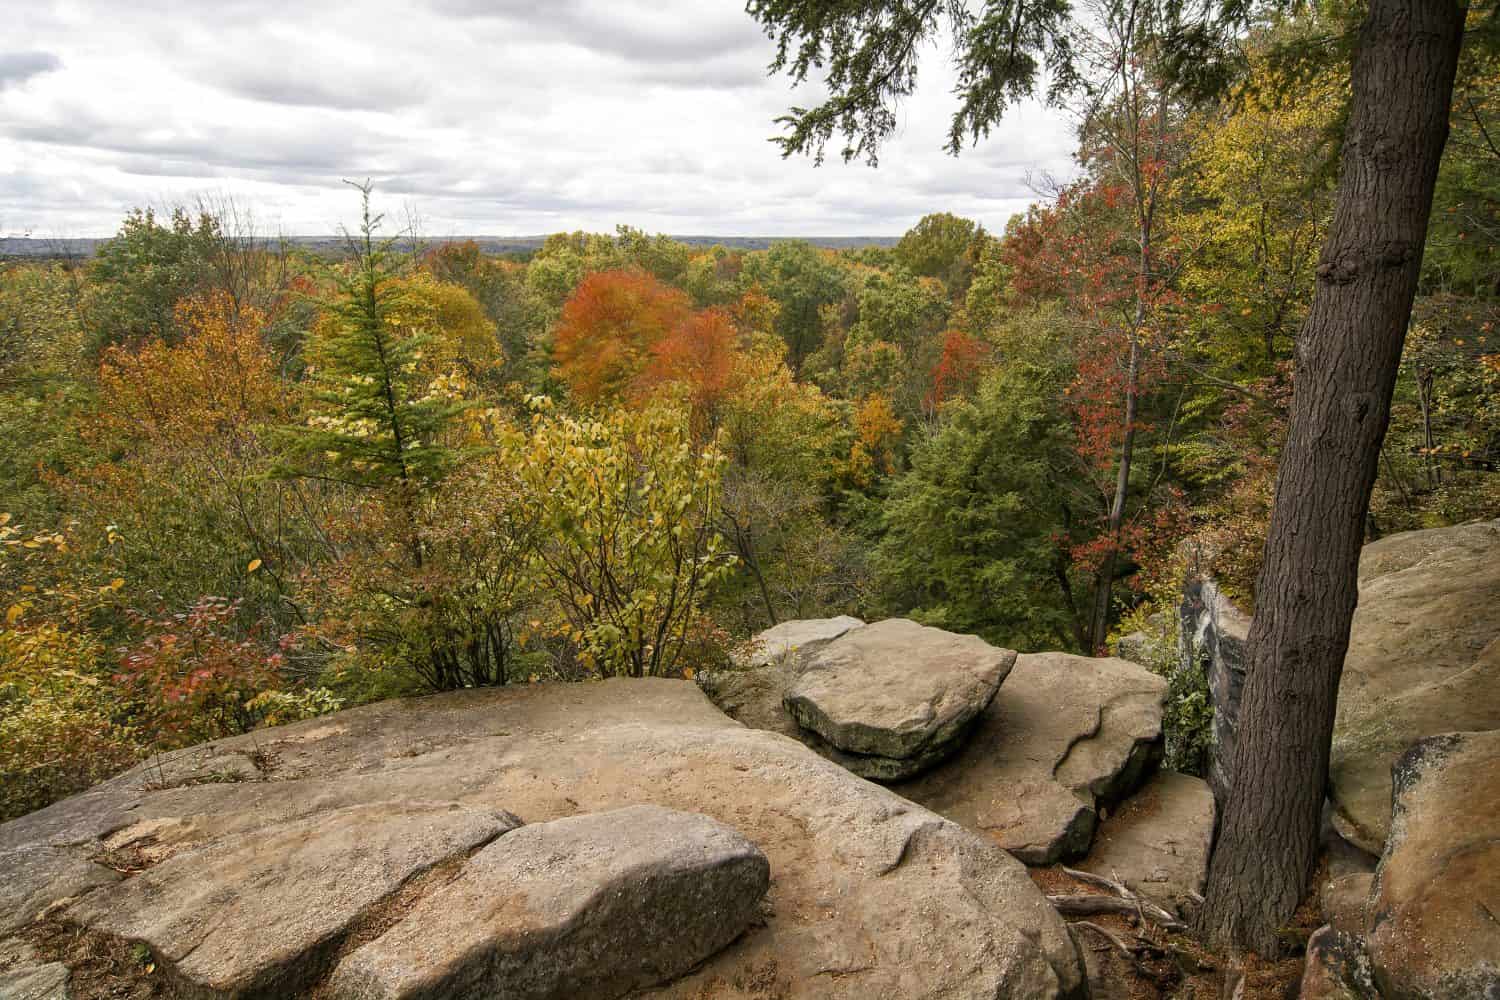 The autumn view from the ledges overlook cuyahoga valley national park near Cleveland Ohio.